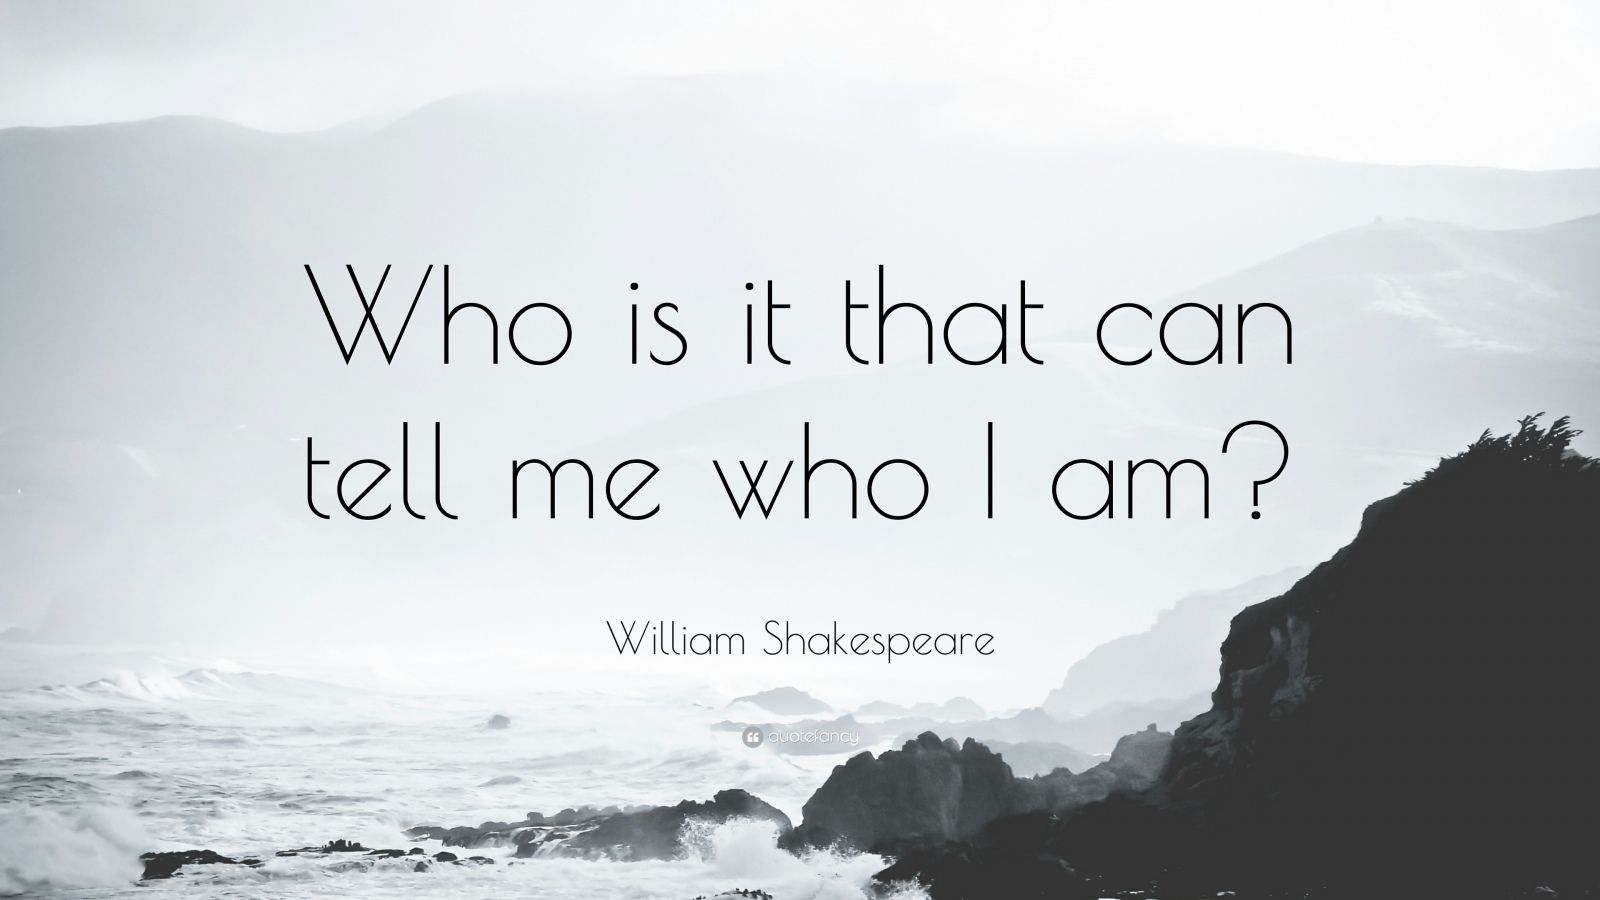 William Shakespeare Quote “Who is it that can tell me who I am